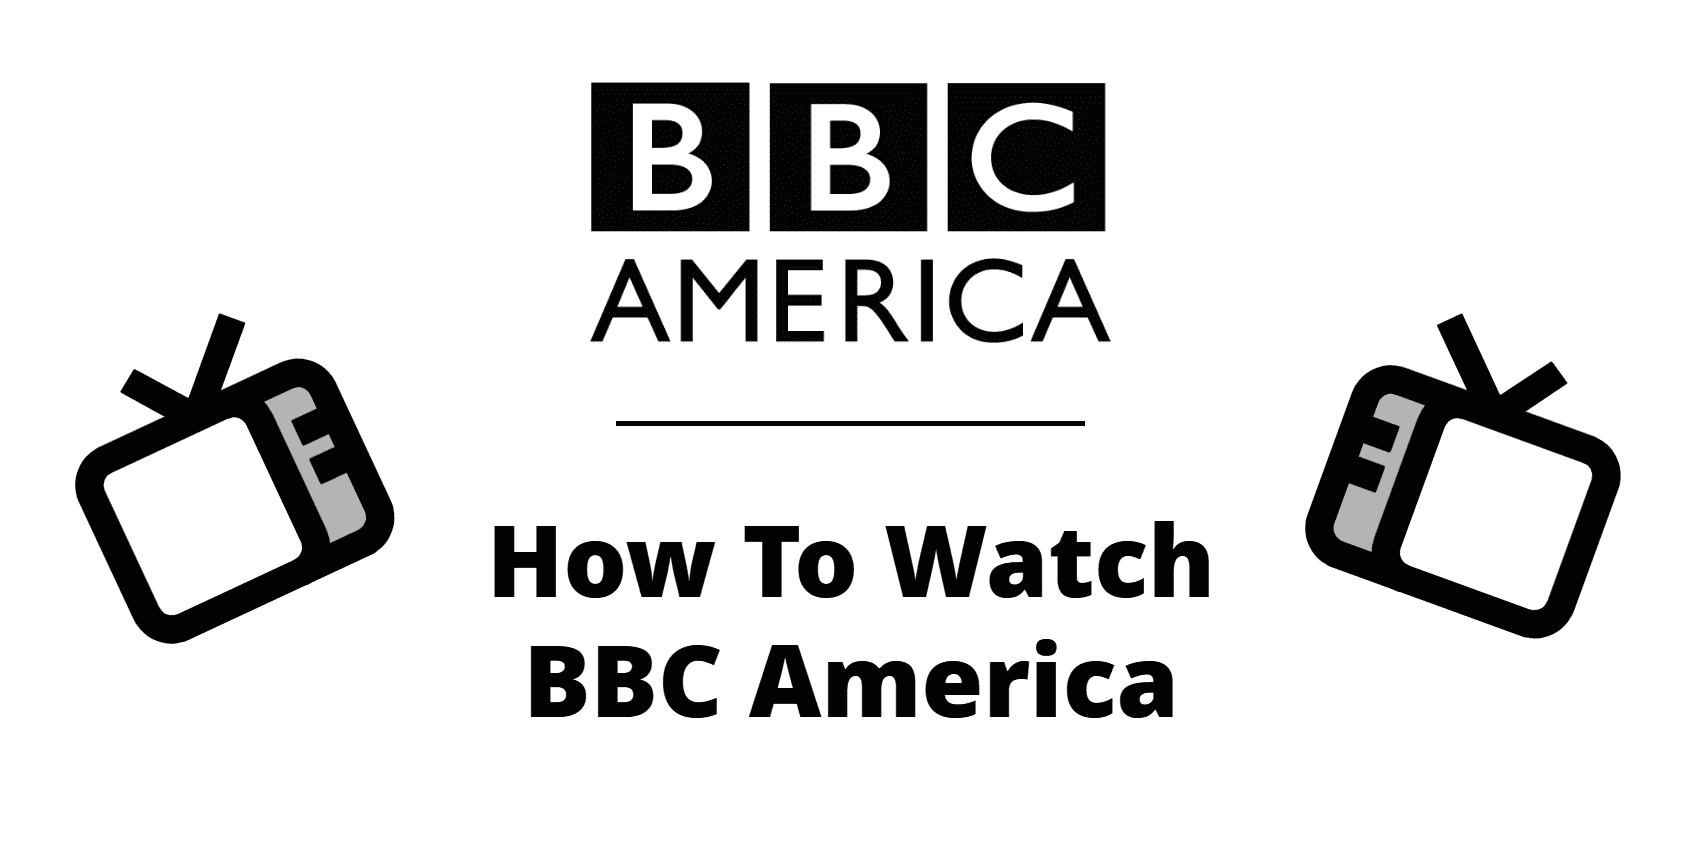 Watch BBC America Live Online With These Cable-Free Streaming Services - HotDog